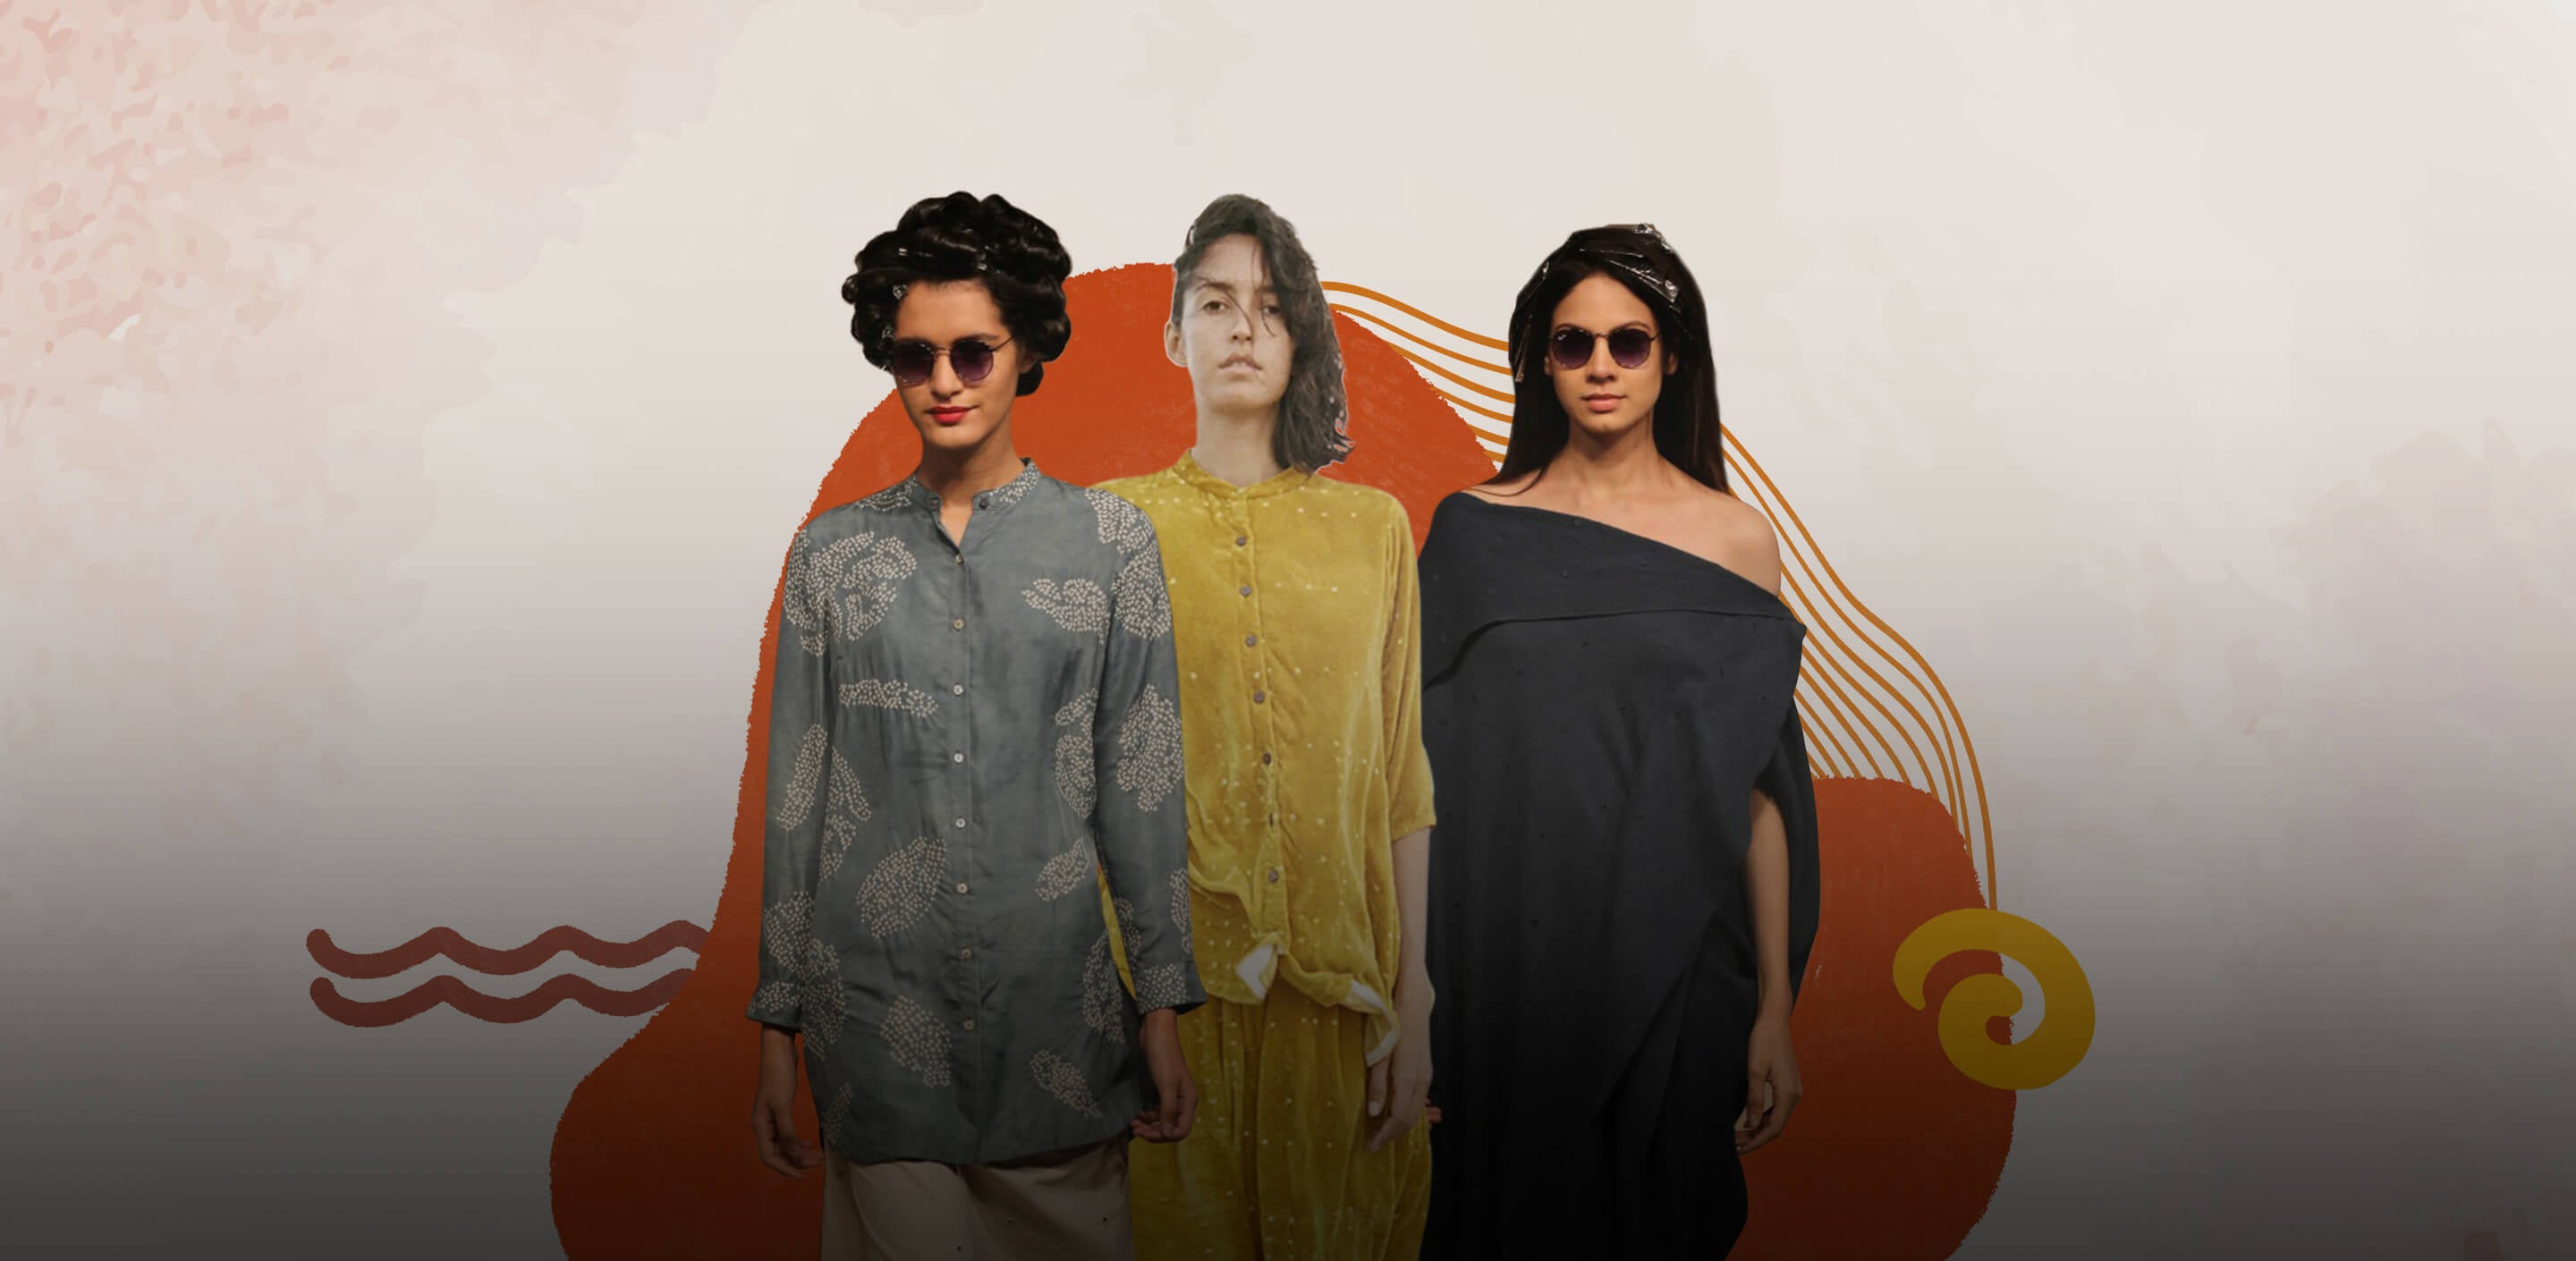 7 Sustainable Fashion Companies From India That Are Changing The Way We Shop